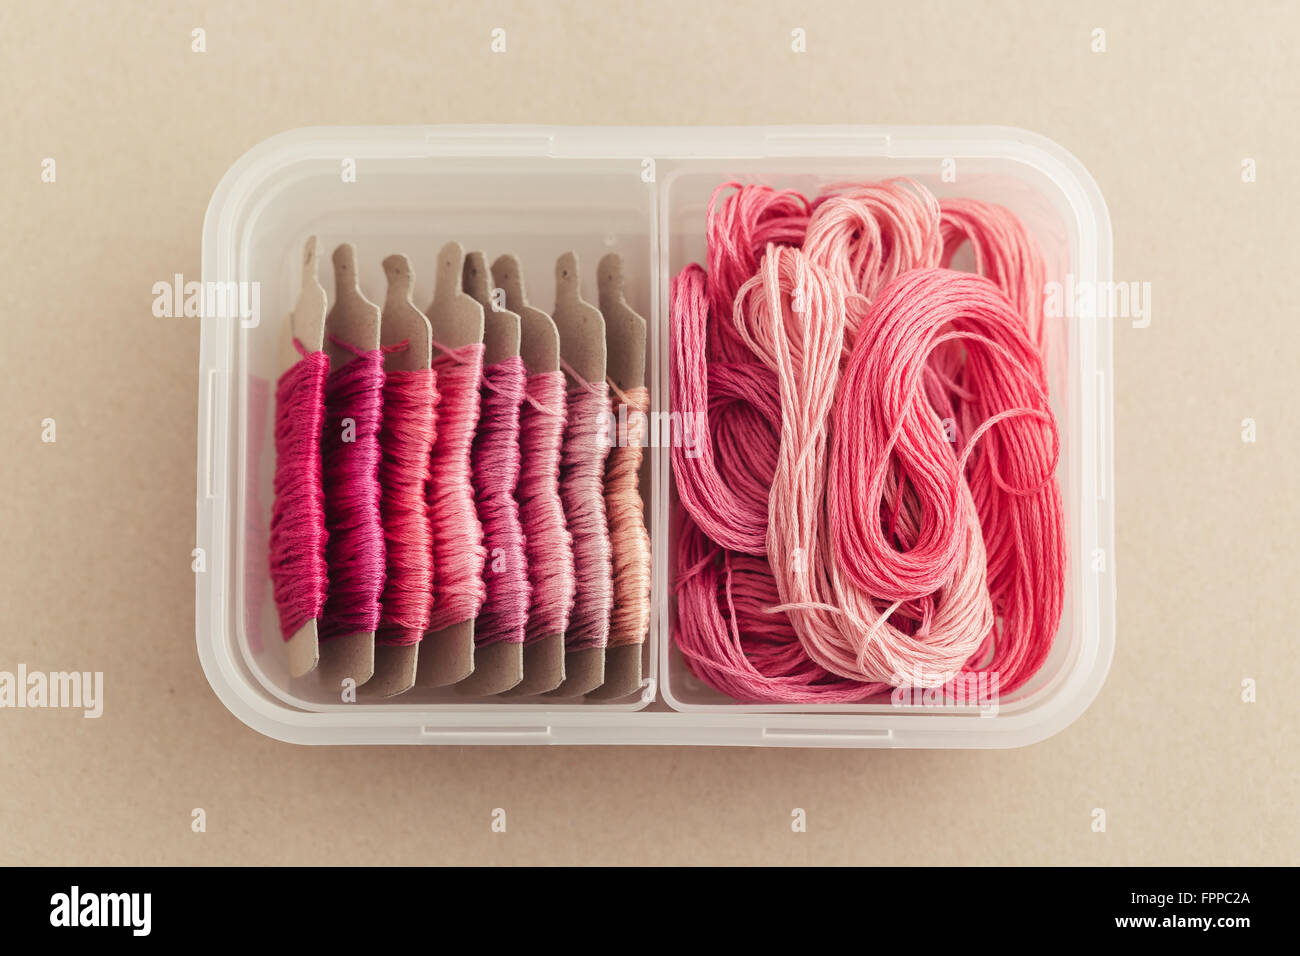 132,892 Pink Thread Images, Stock Photos, 3D objects, & Vectors